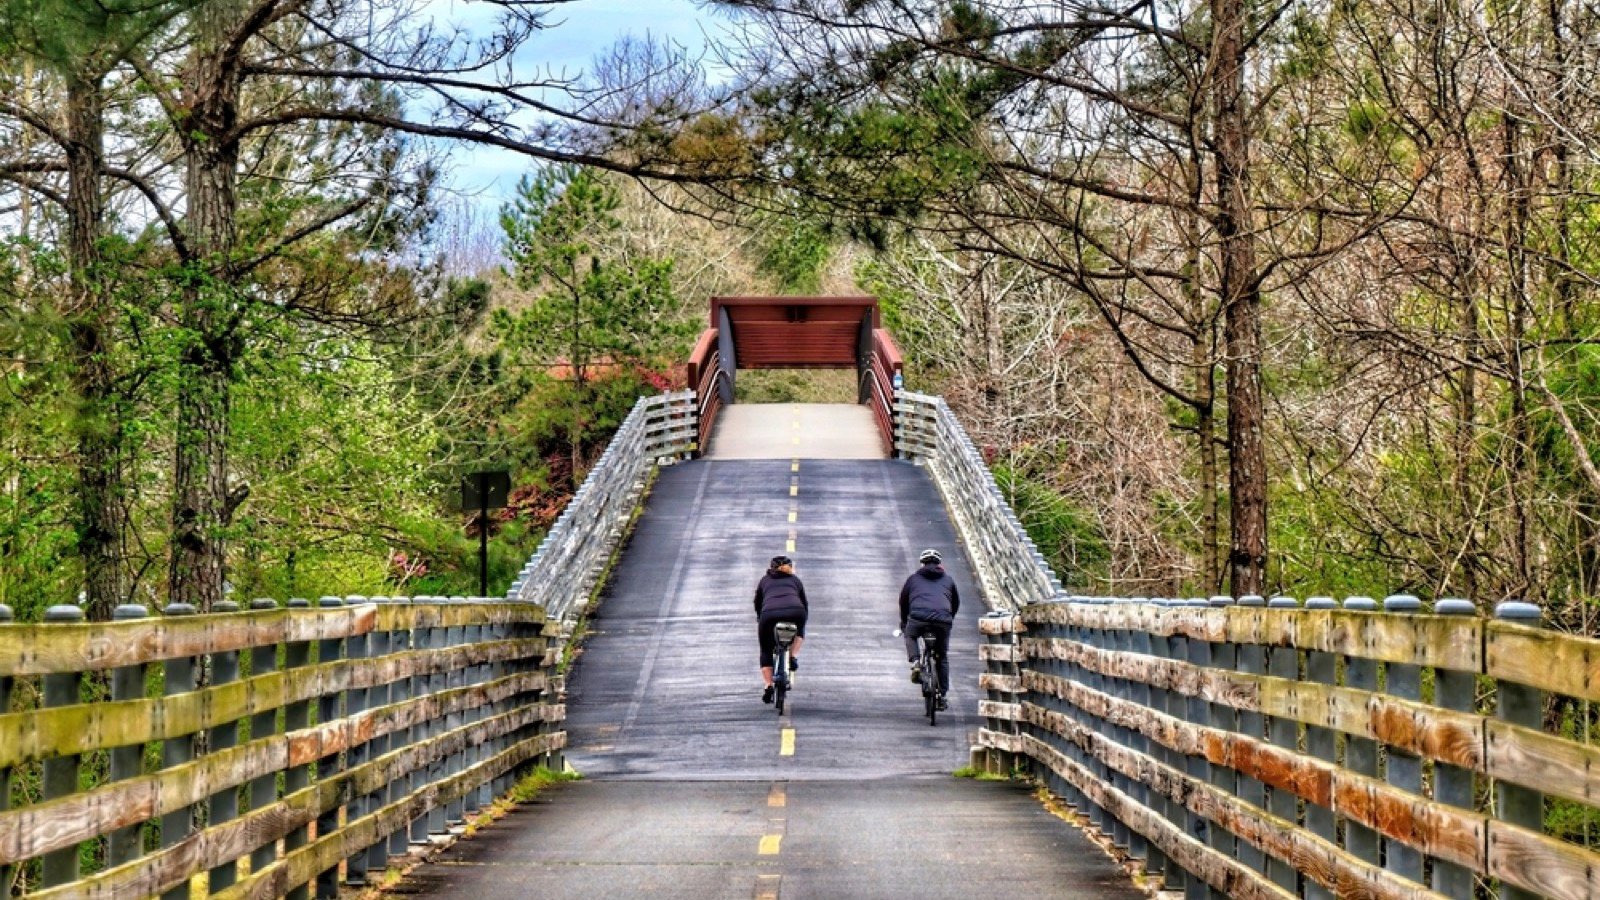 <p>Hike, bike, ride a horse, jog, or skate the 61.5-mile paved pathway that follows an old rail line near Smyrna. Travel through the historic downtowns and enjoy the preserved forests and stunning scenery of the rural countryside. The trails are suitable for the entire family.</p>